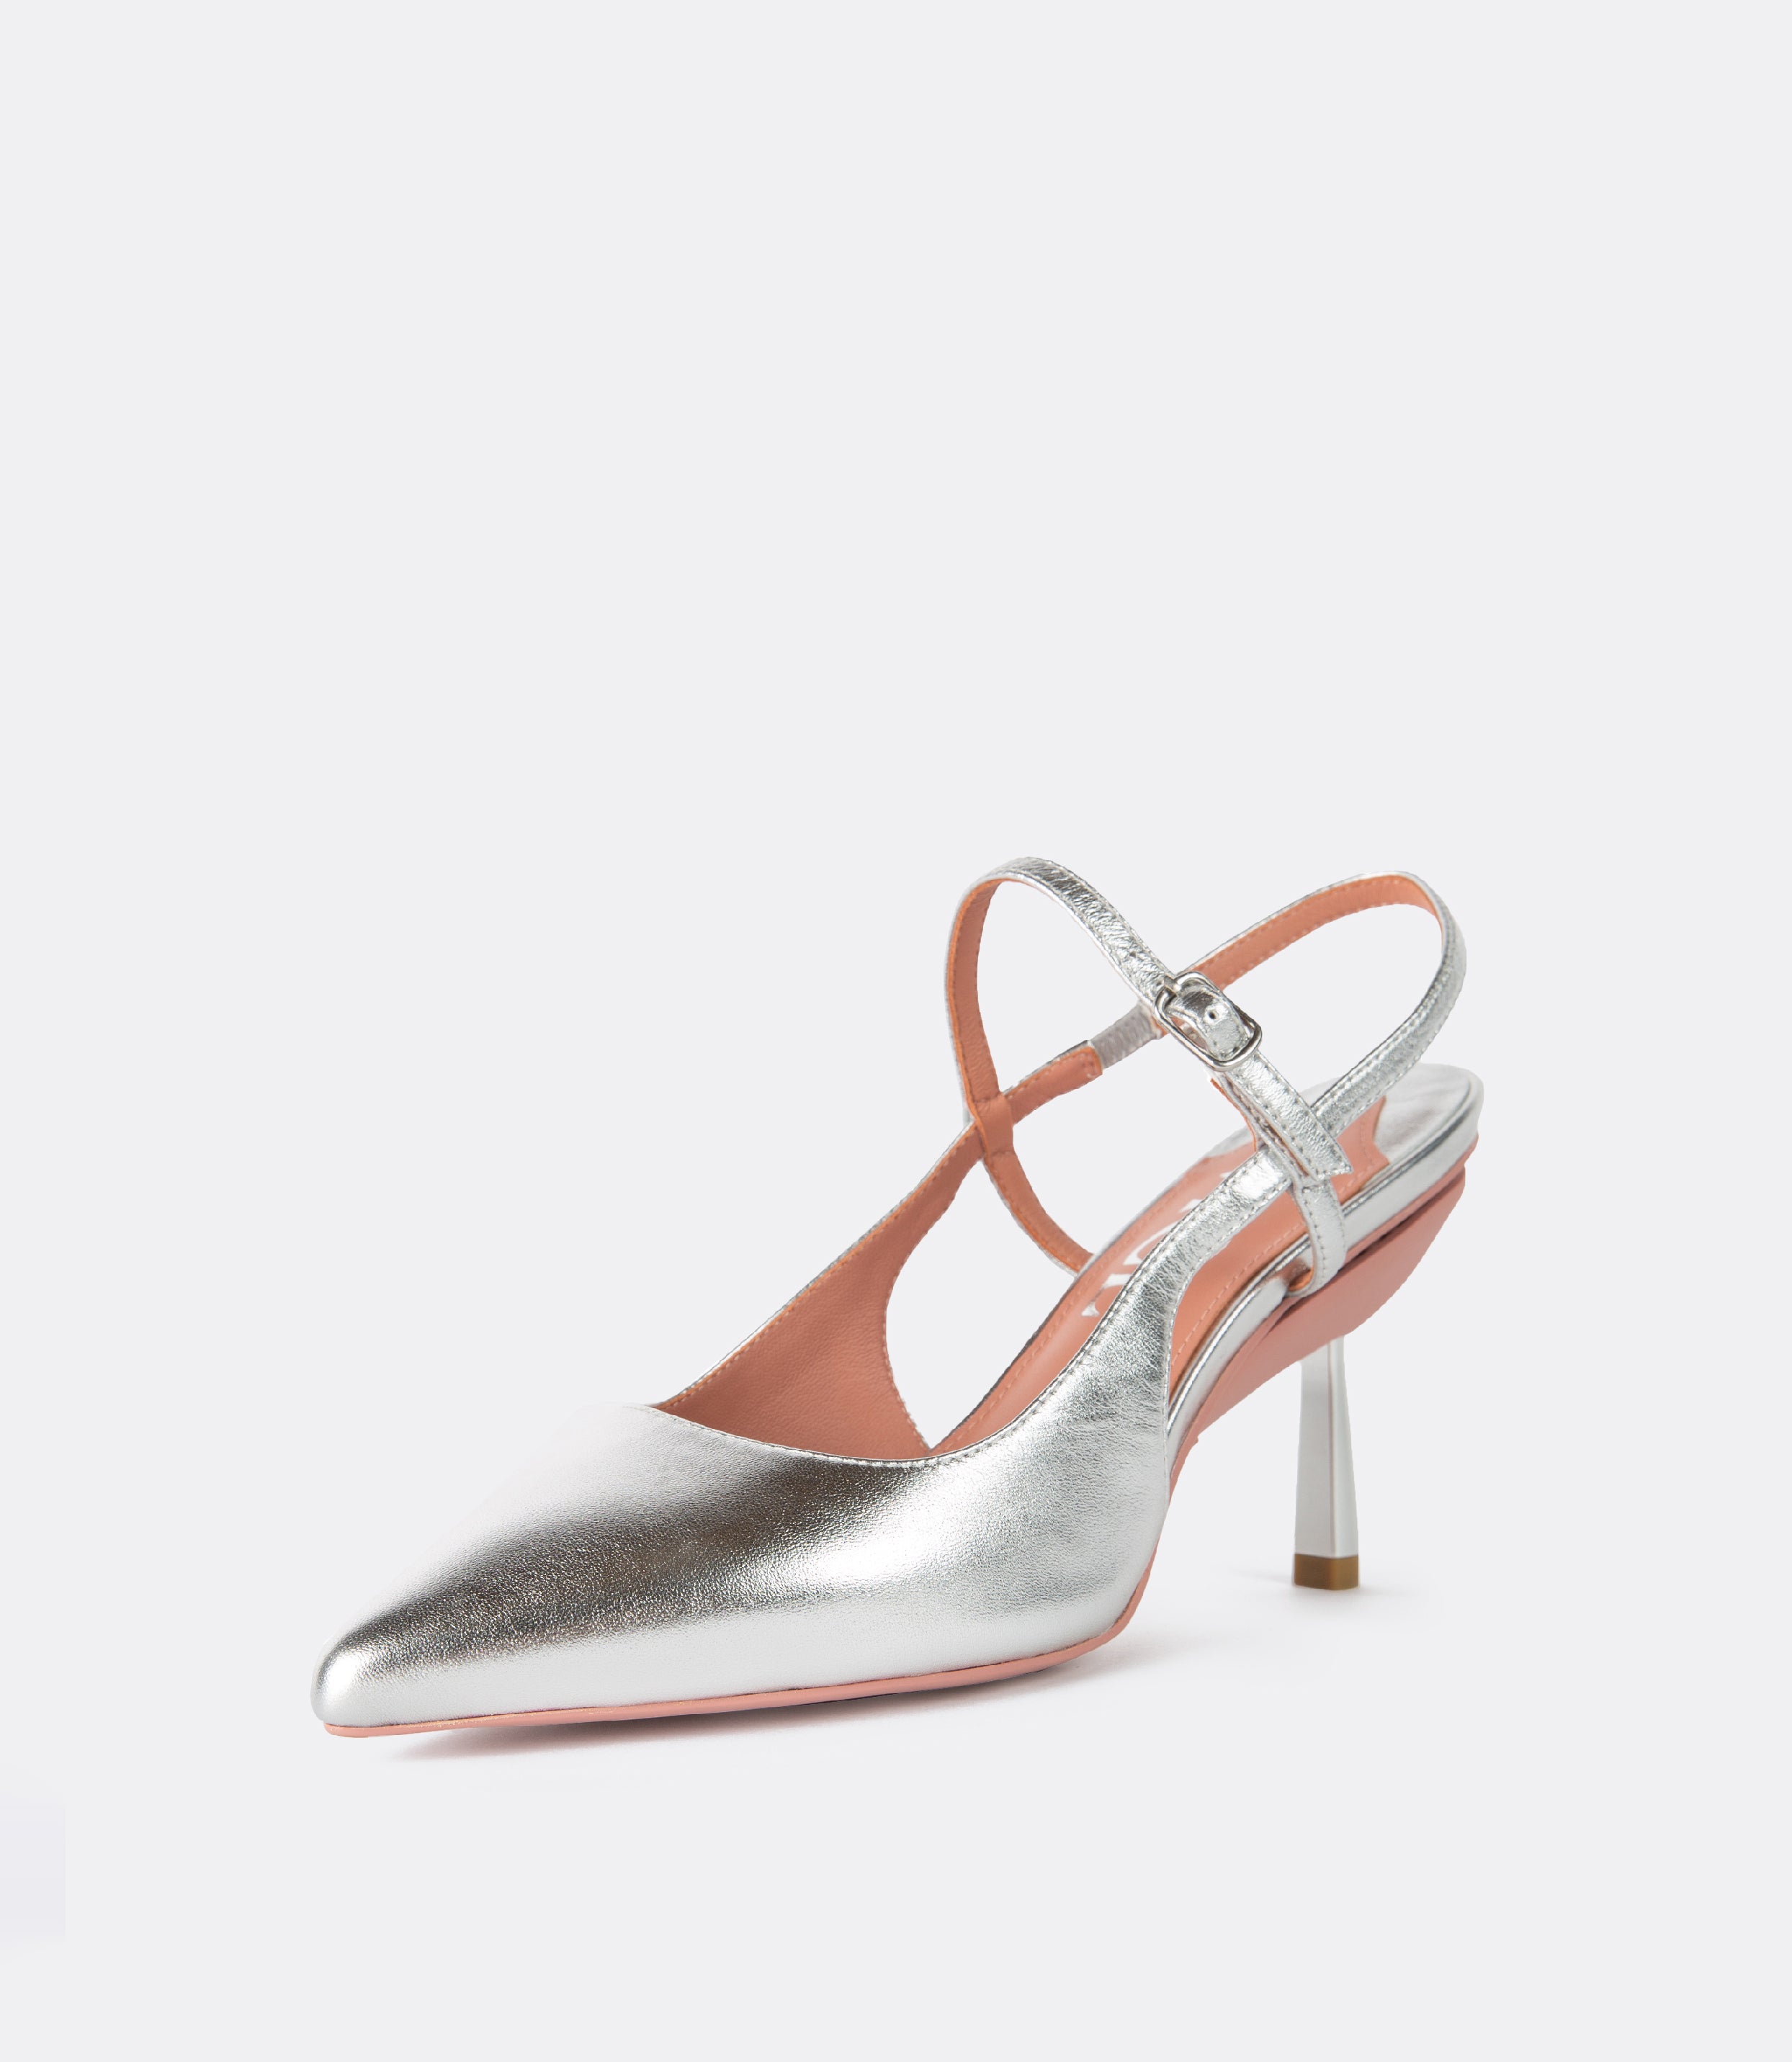 Front view of silver slingback heels.